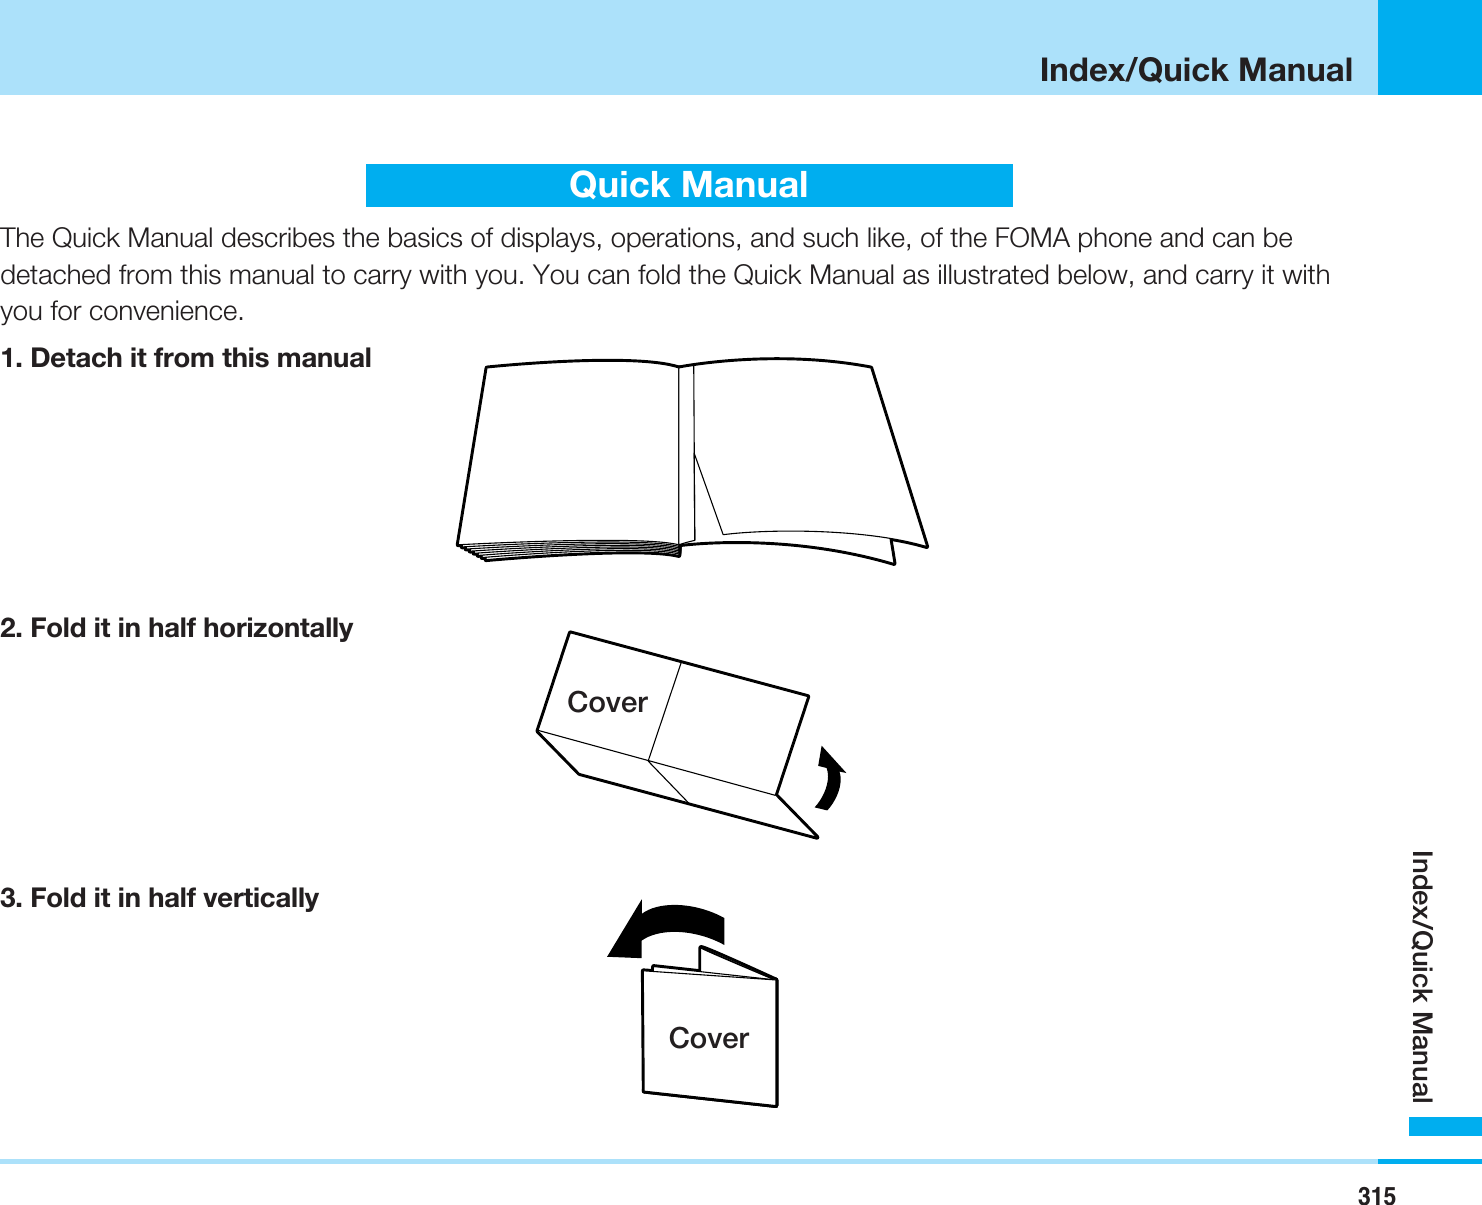 315Index/Quick ManualIndex/Quick ManualQuick ManualThe Quick Manual describes the basics of displays, operations, and such like, of the FOMA phone and can bedetached from this manual to carry with you. You can fold the Quick Manual as illustrated below, and carry it withyou for convenience.1. Detach it from this manual2. Fold it in half horizontally3. Fold it in half verticallyCoverCover